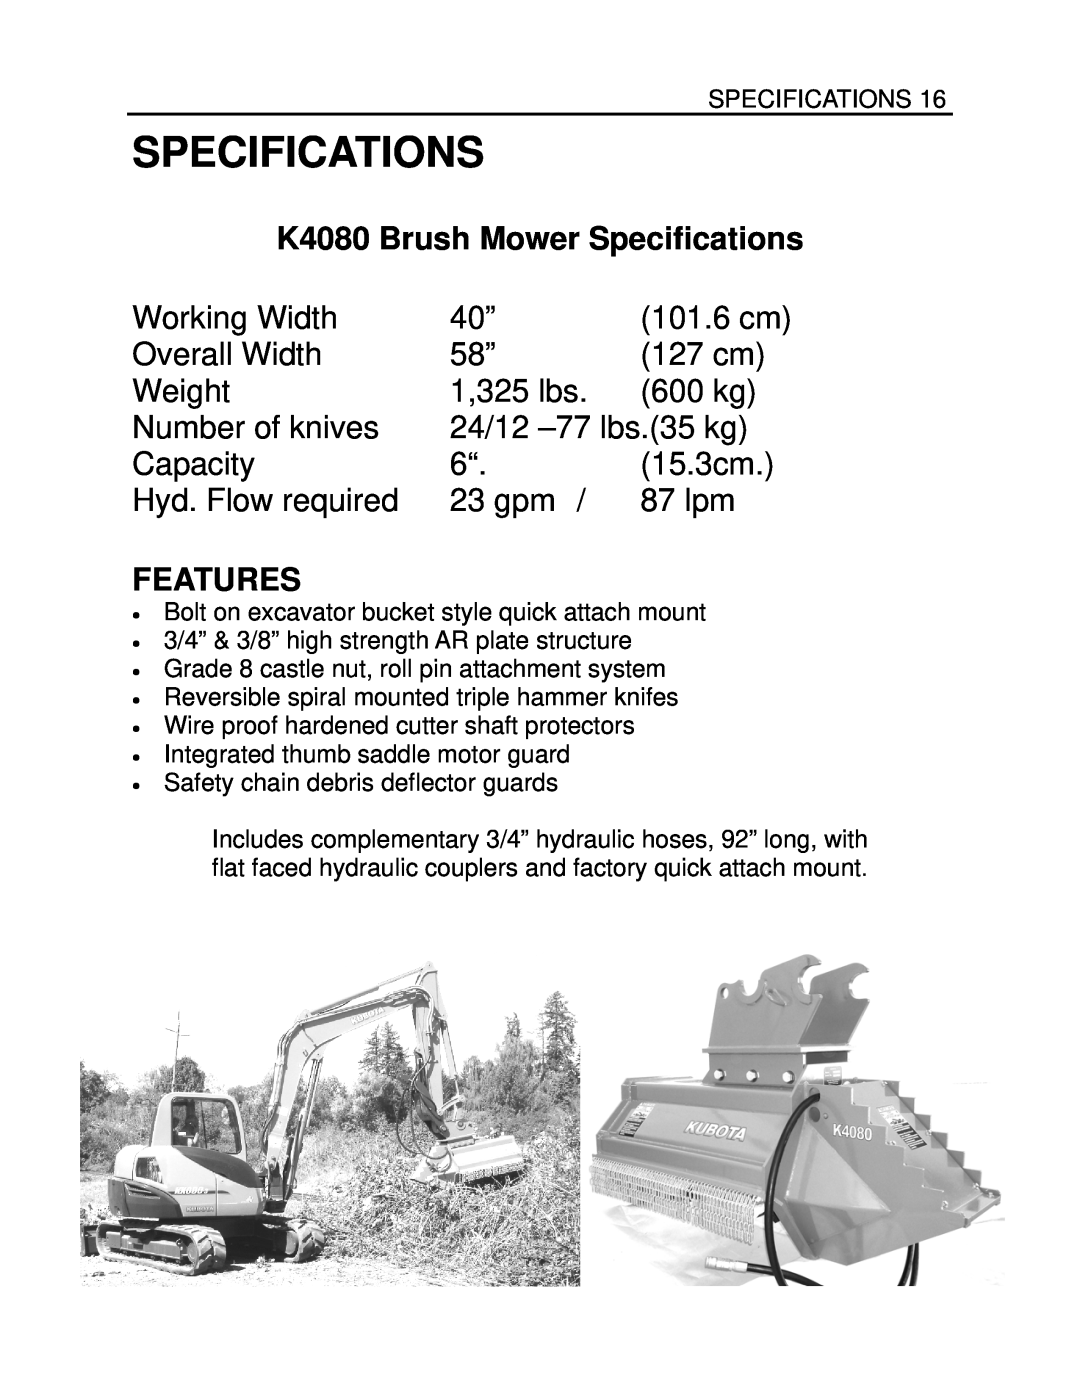 Generac Power Systems manual K4080 Brush Mower Specifications, Features 